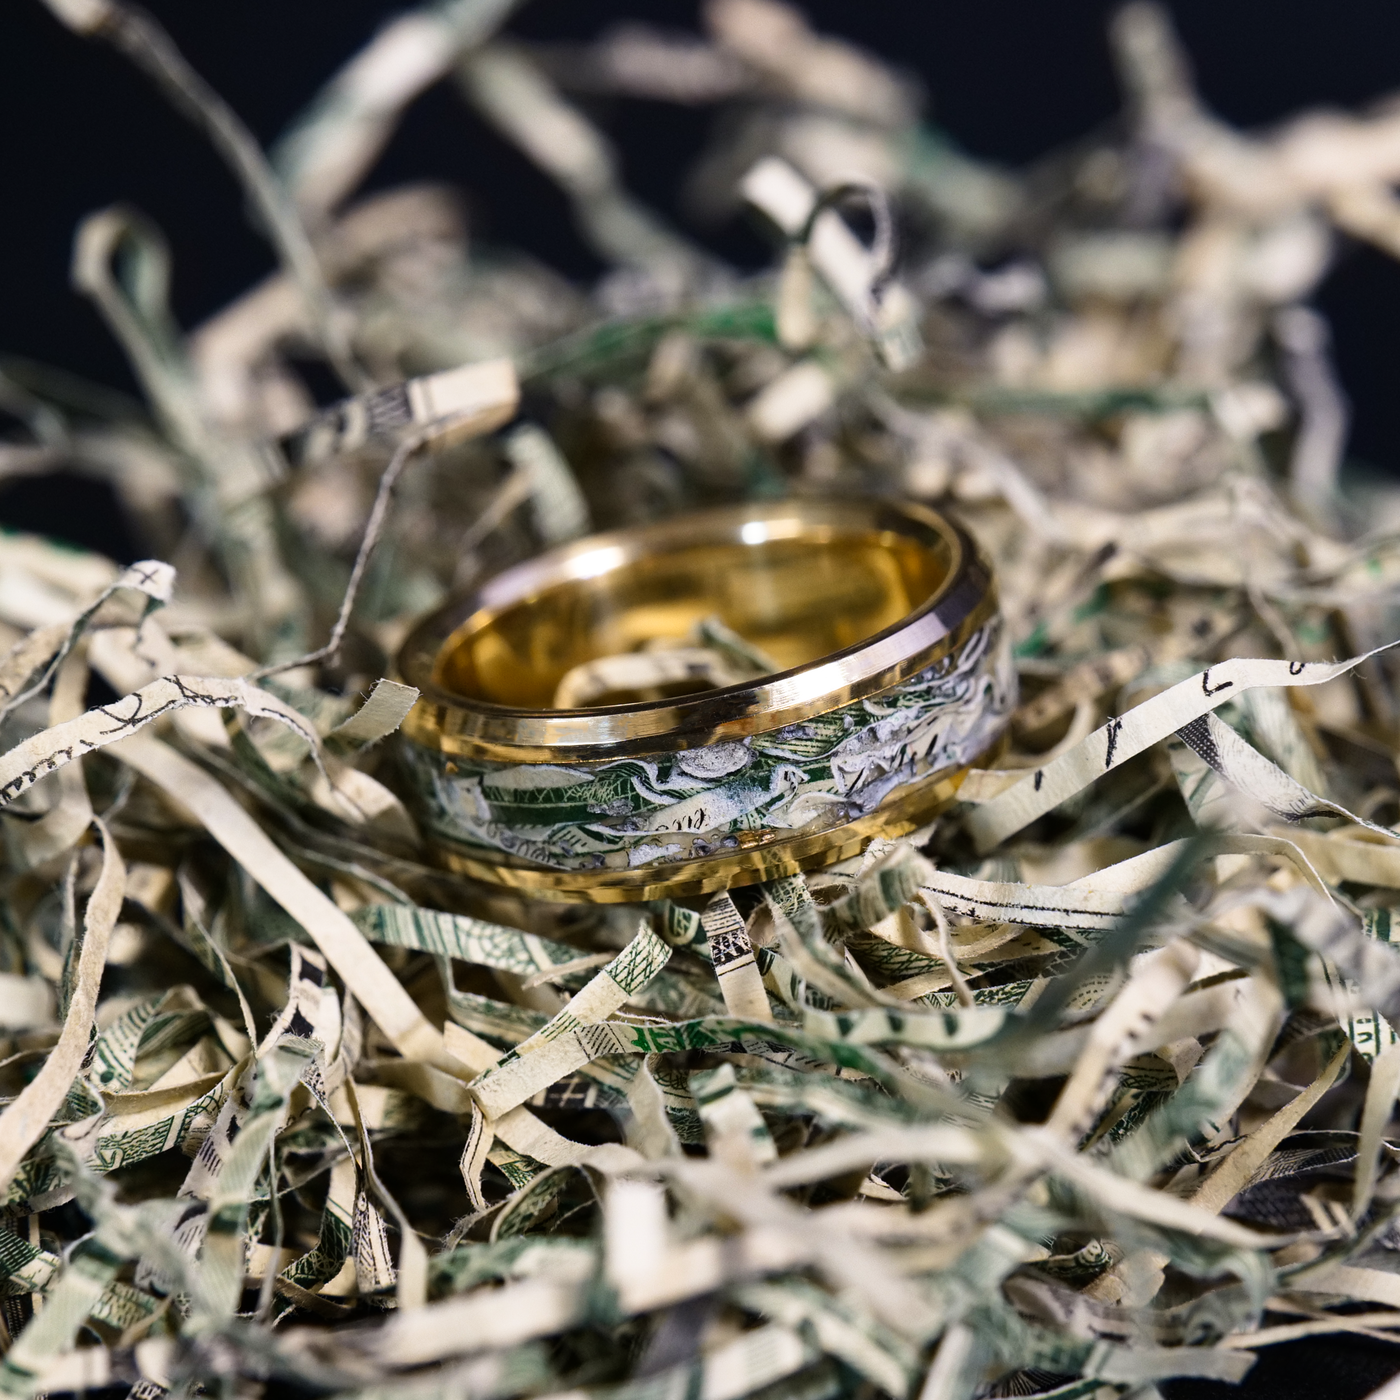 Solid Gold and Shredded Cash Glowstone Ring - Patrick Adair Designs